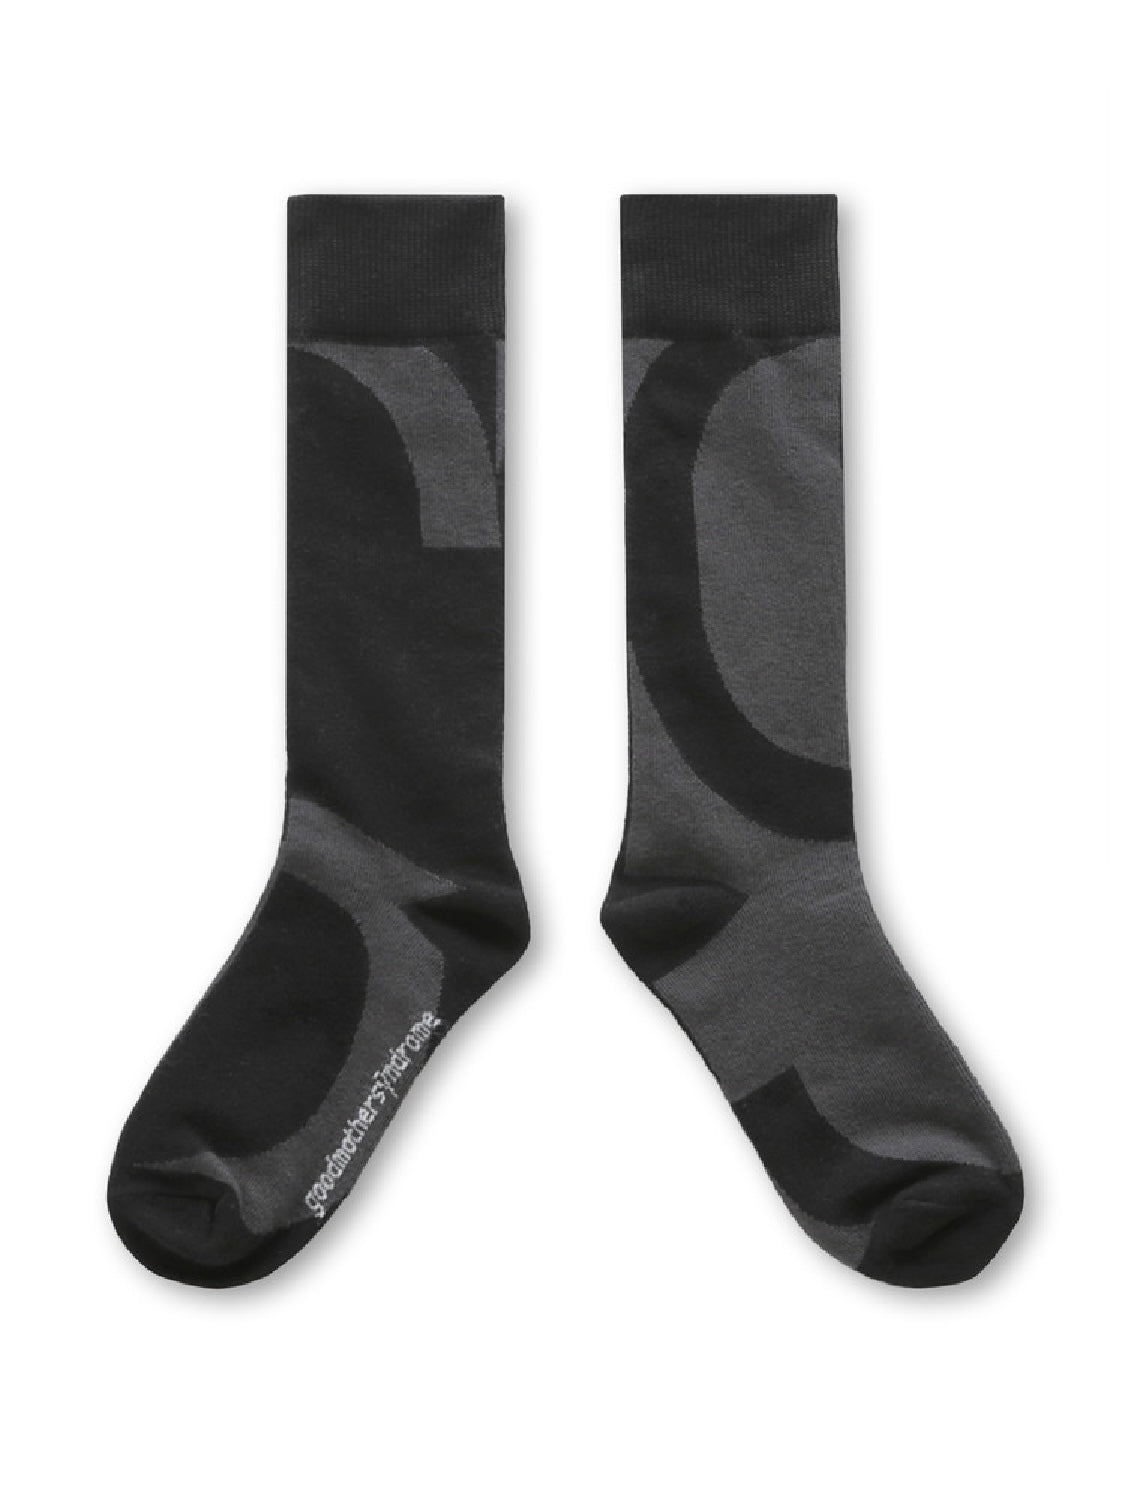 S-Curve Pattern&Invert Color Play, Black/Grey